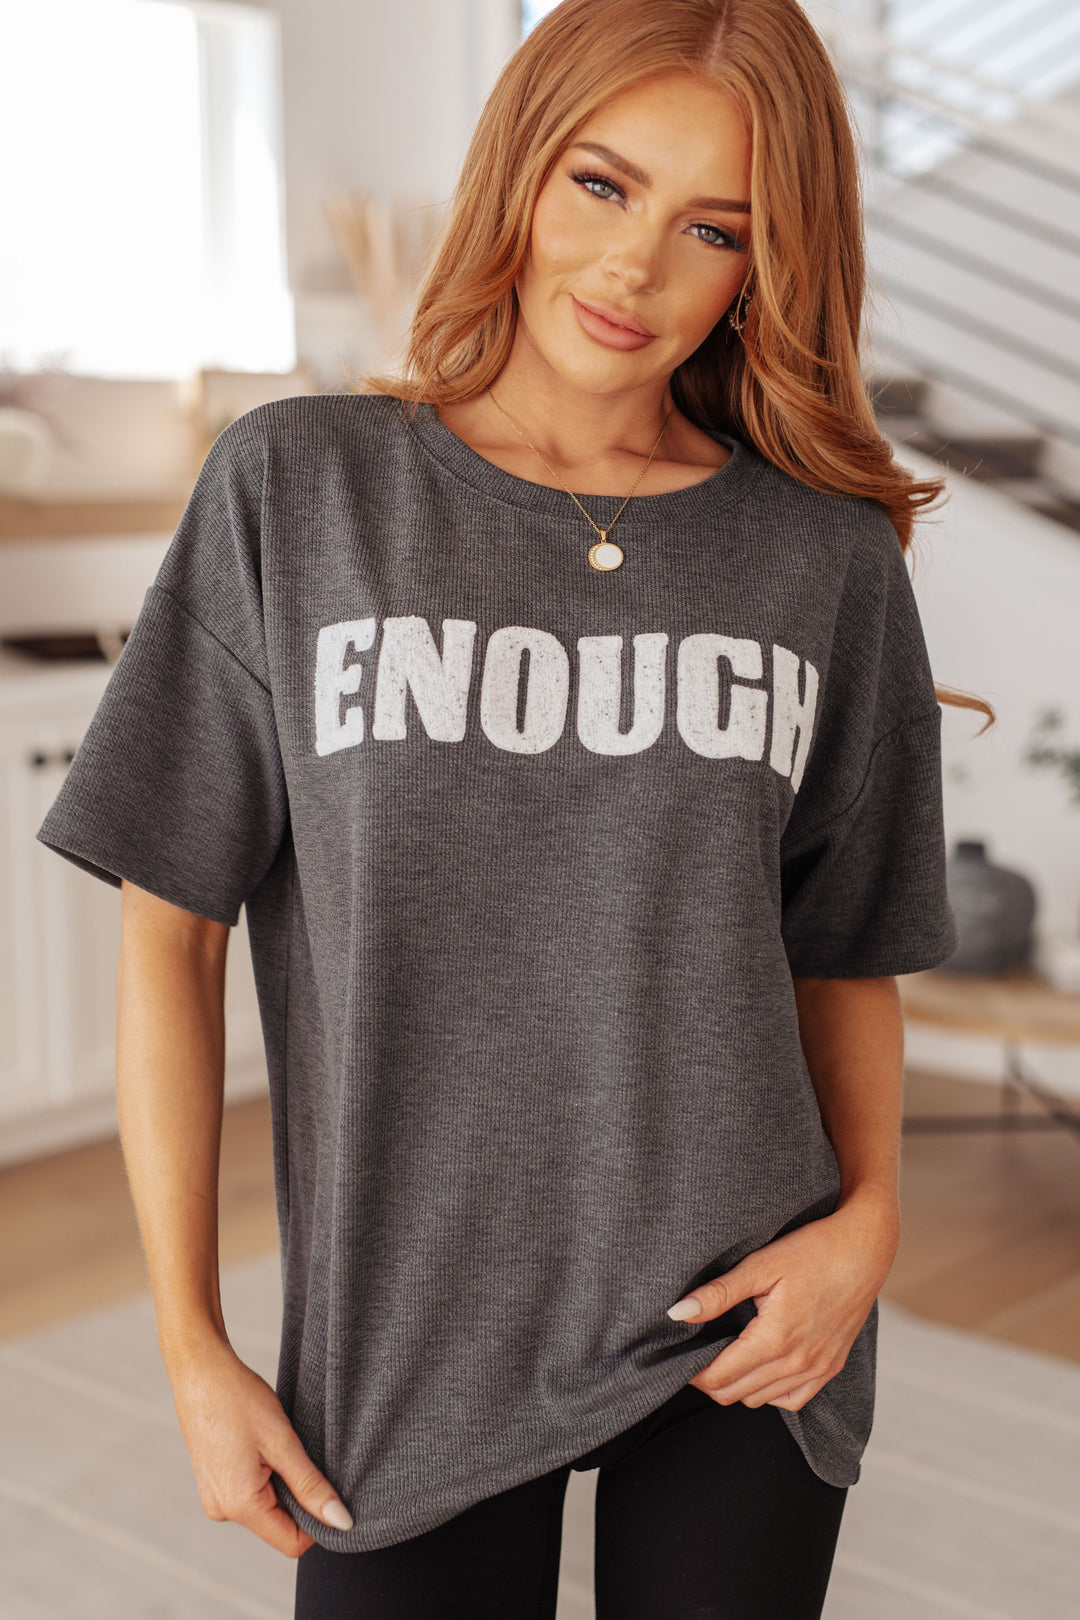 Always Enough Graphic Tee in Charcoal-Ever Joy